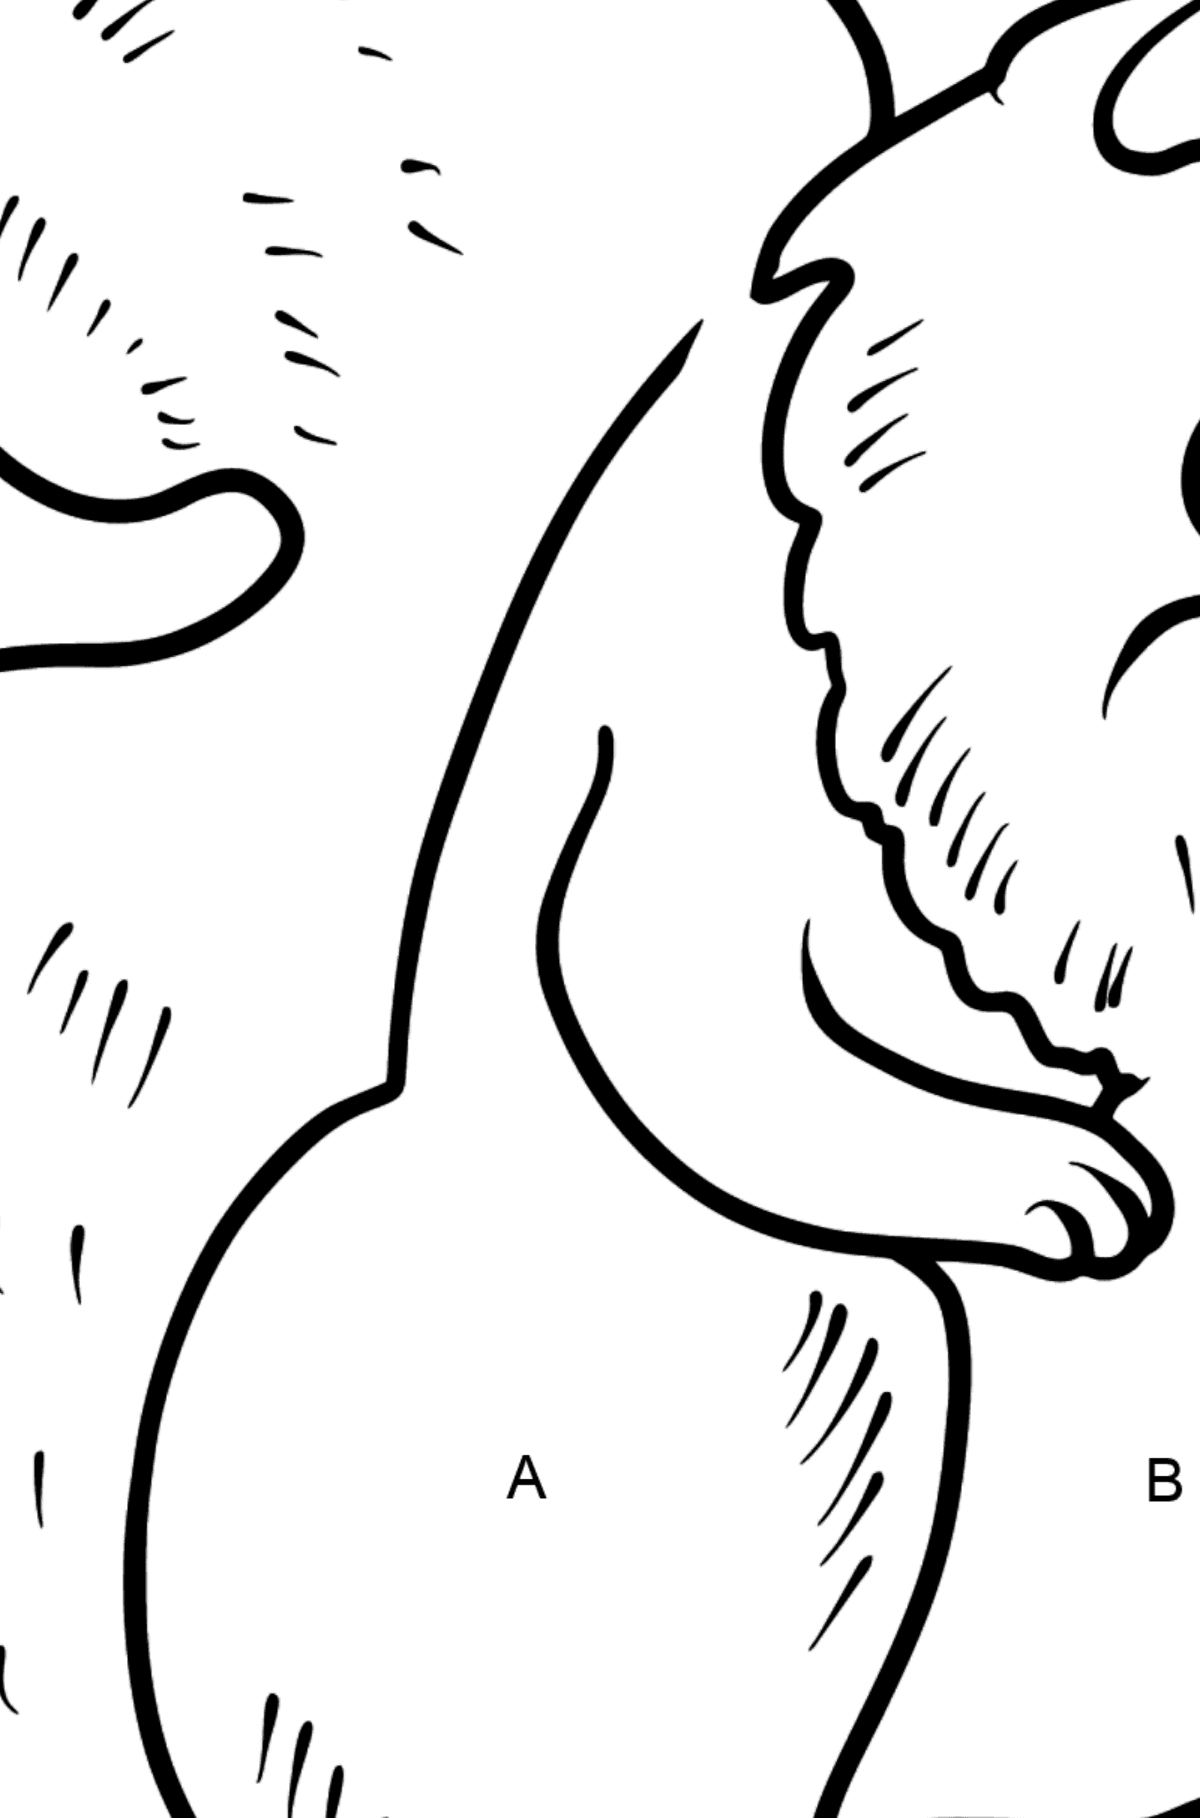 Squirrel coloring page - Coloring by Letters for Kids